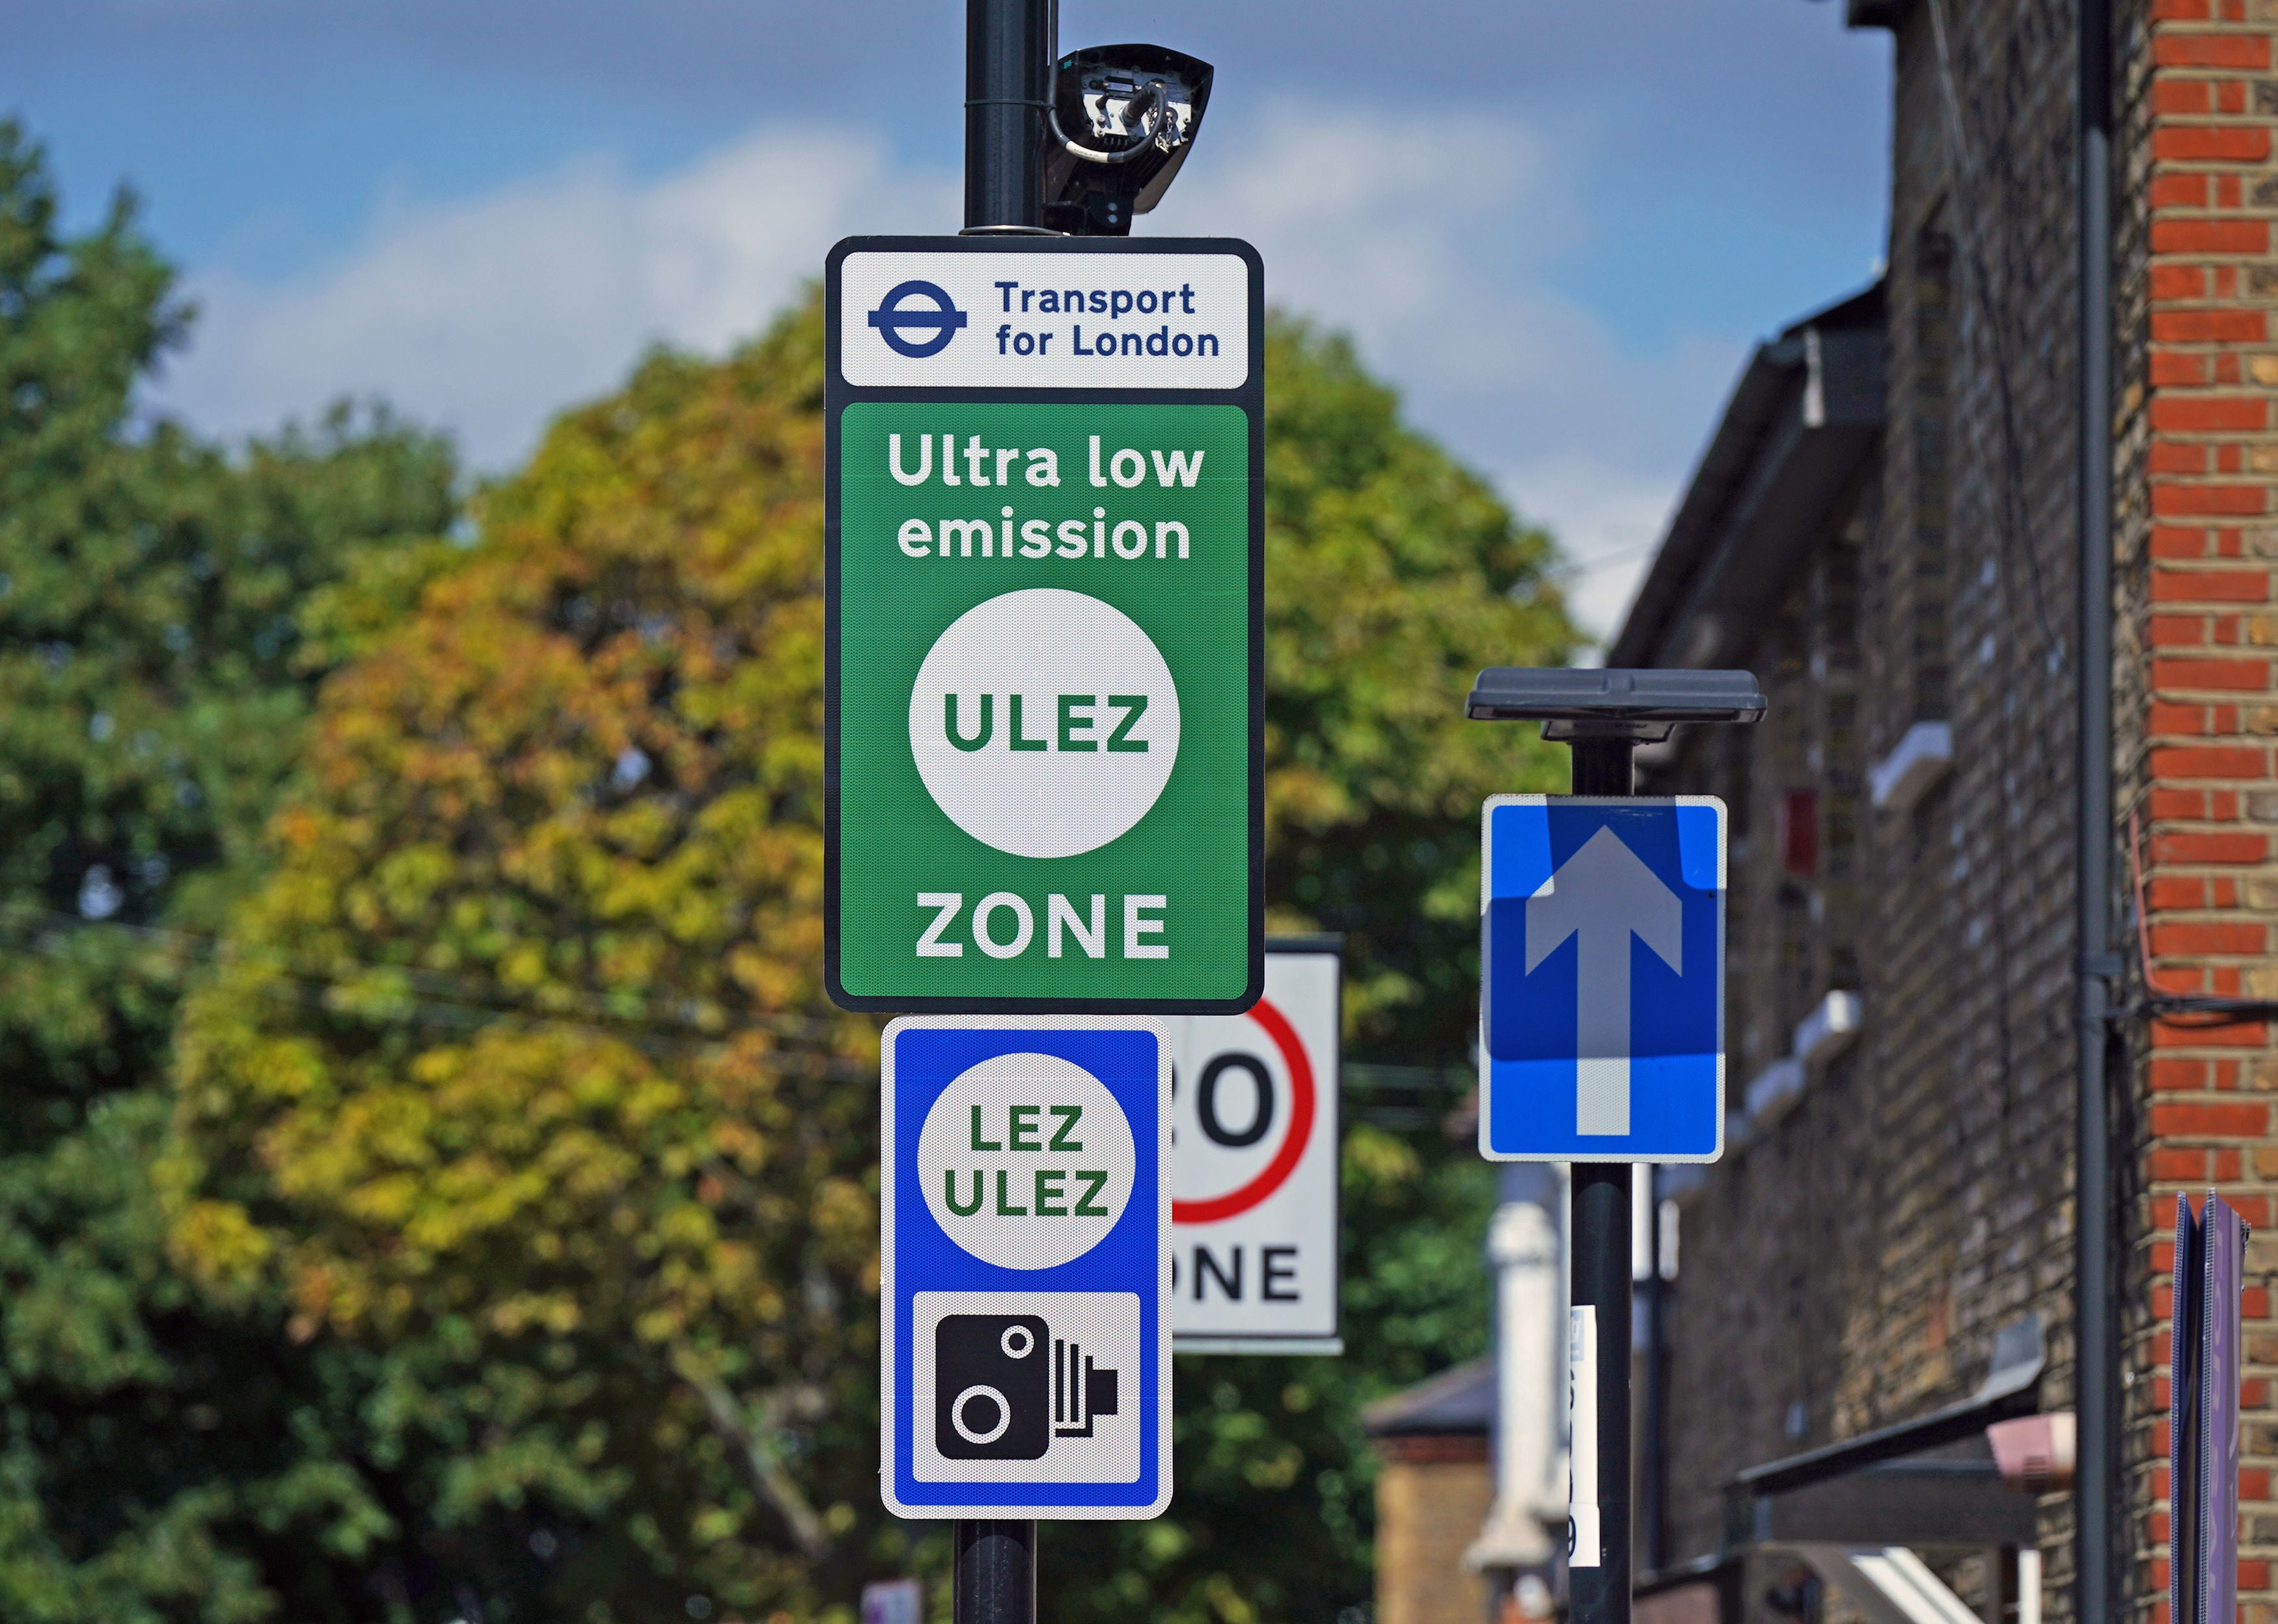 Belgian authorities are investigating allegations thousands of fines could have been sent unlawfully to drivers for breaches of London’s ultra-low emissions zone (Ulez)